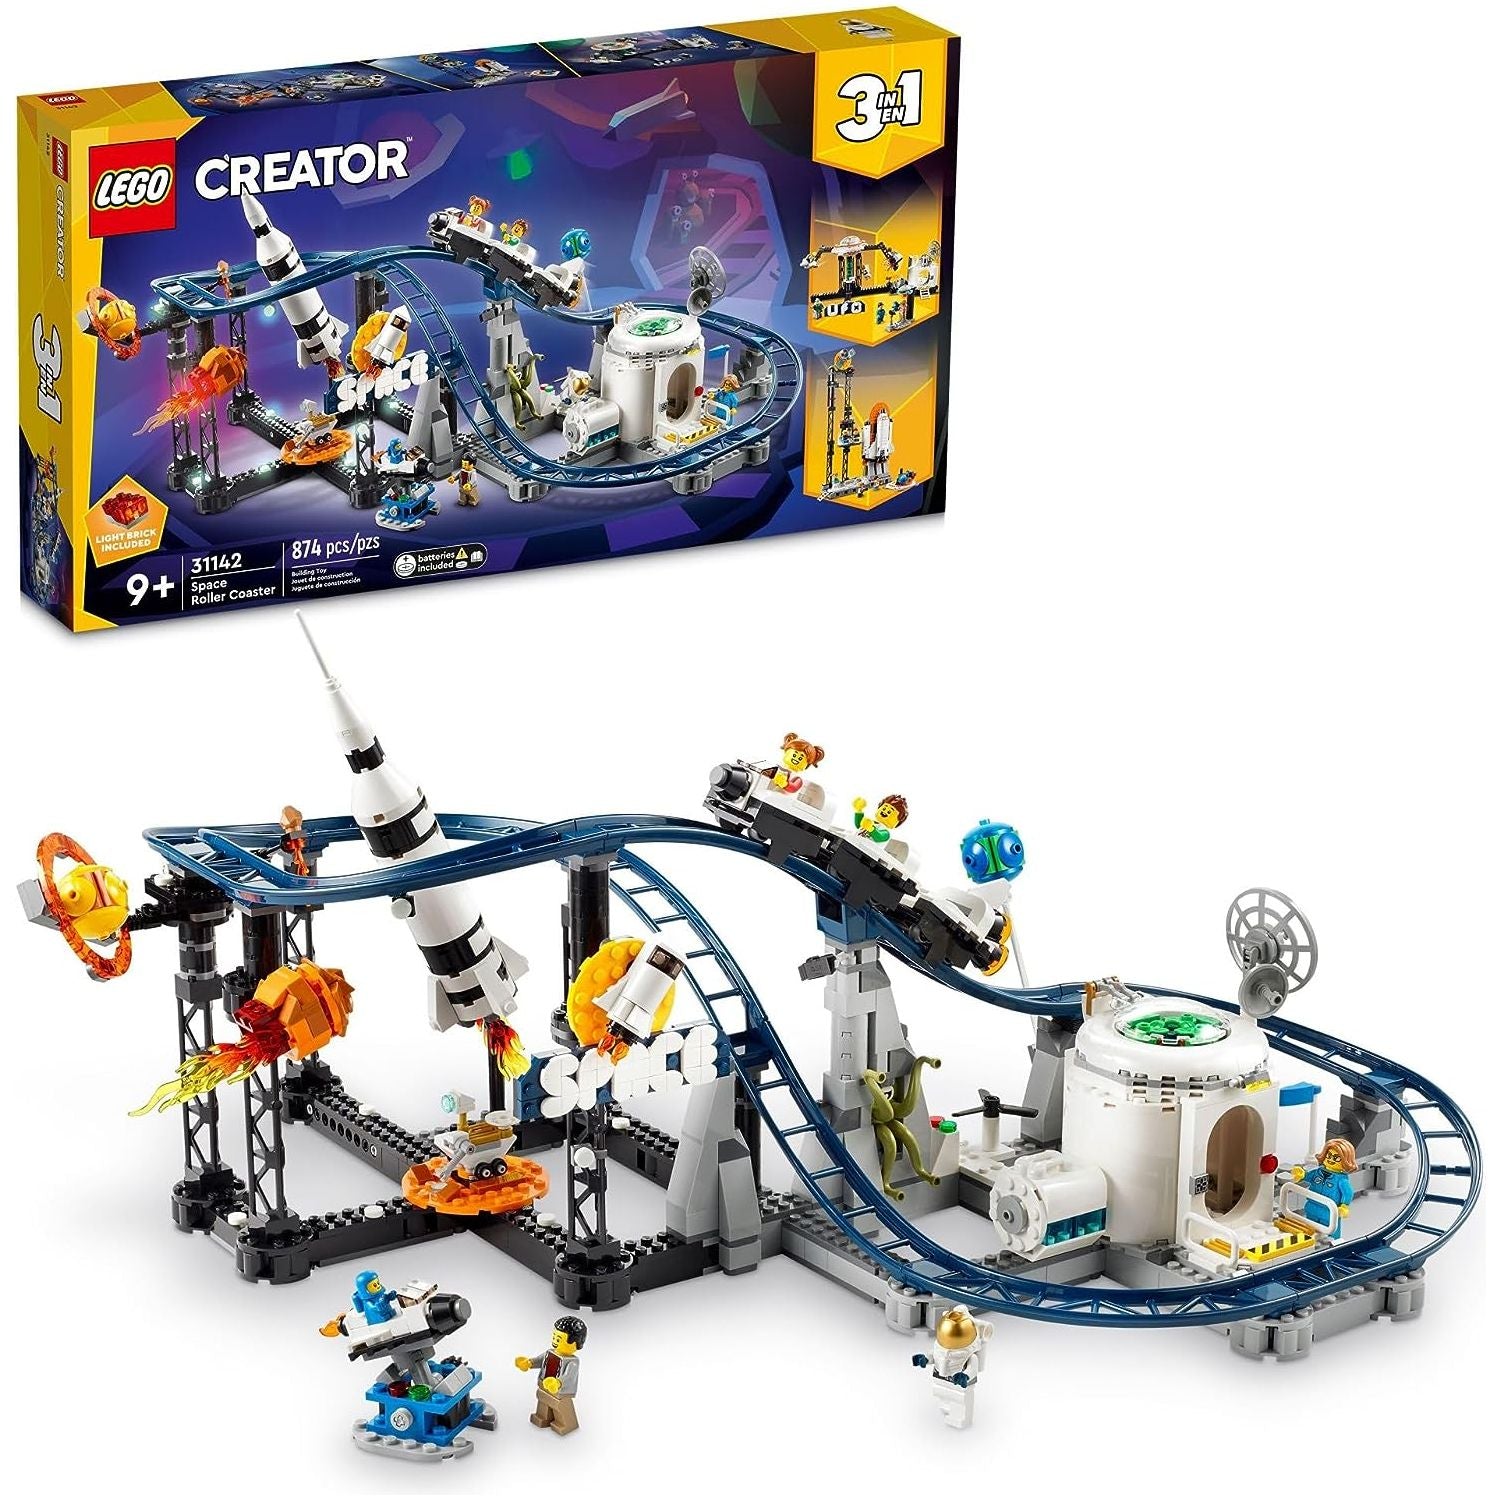 LEGO Creator Space Roller Coaster 31142 3 in 1 Building Toy Set Featuring a Roller Coaster, Drop Tower, Carousel and 5 Minifigures, Rebuildable Amusement Park